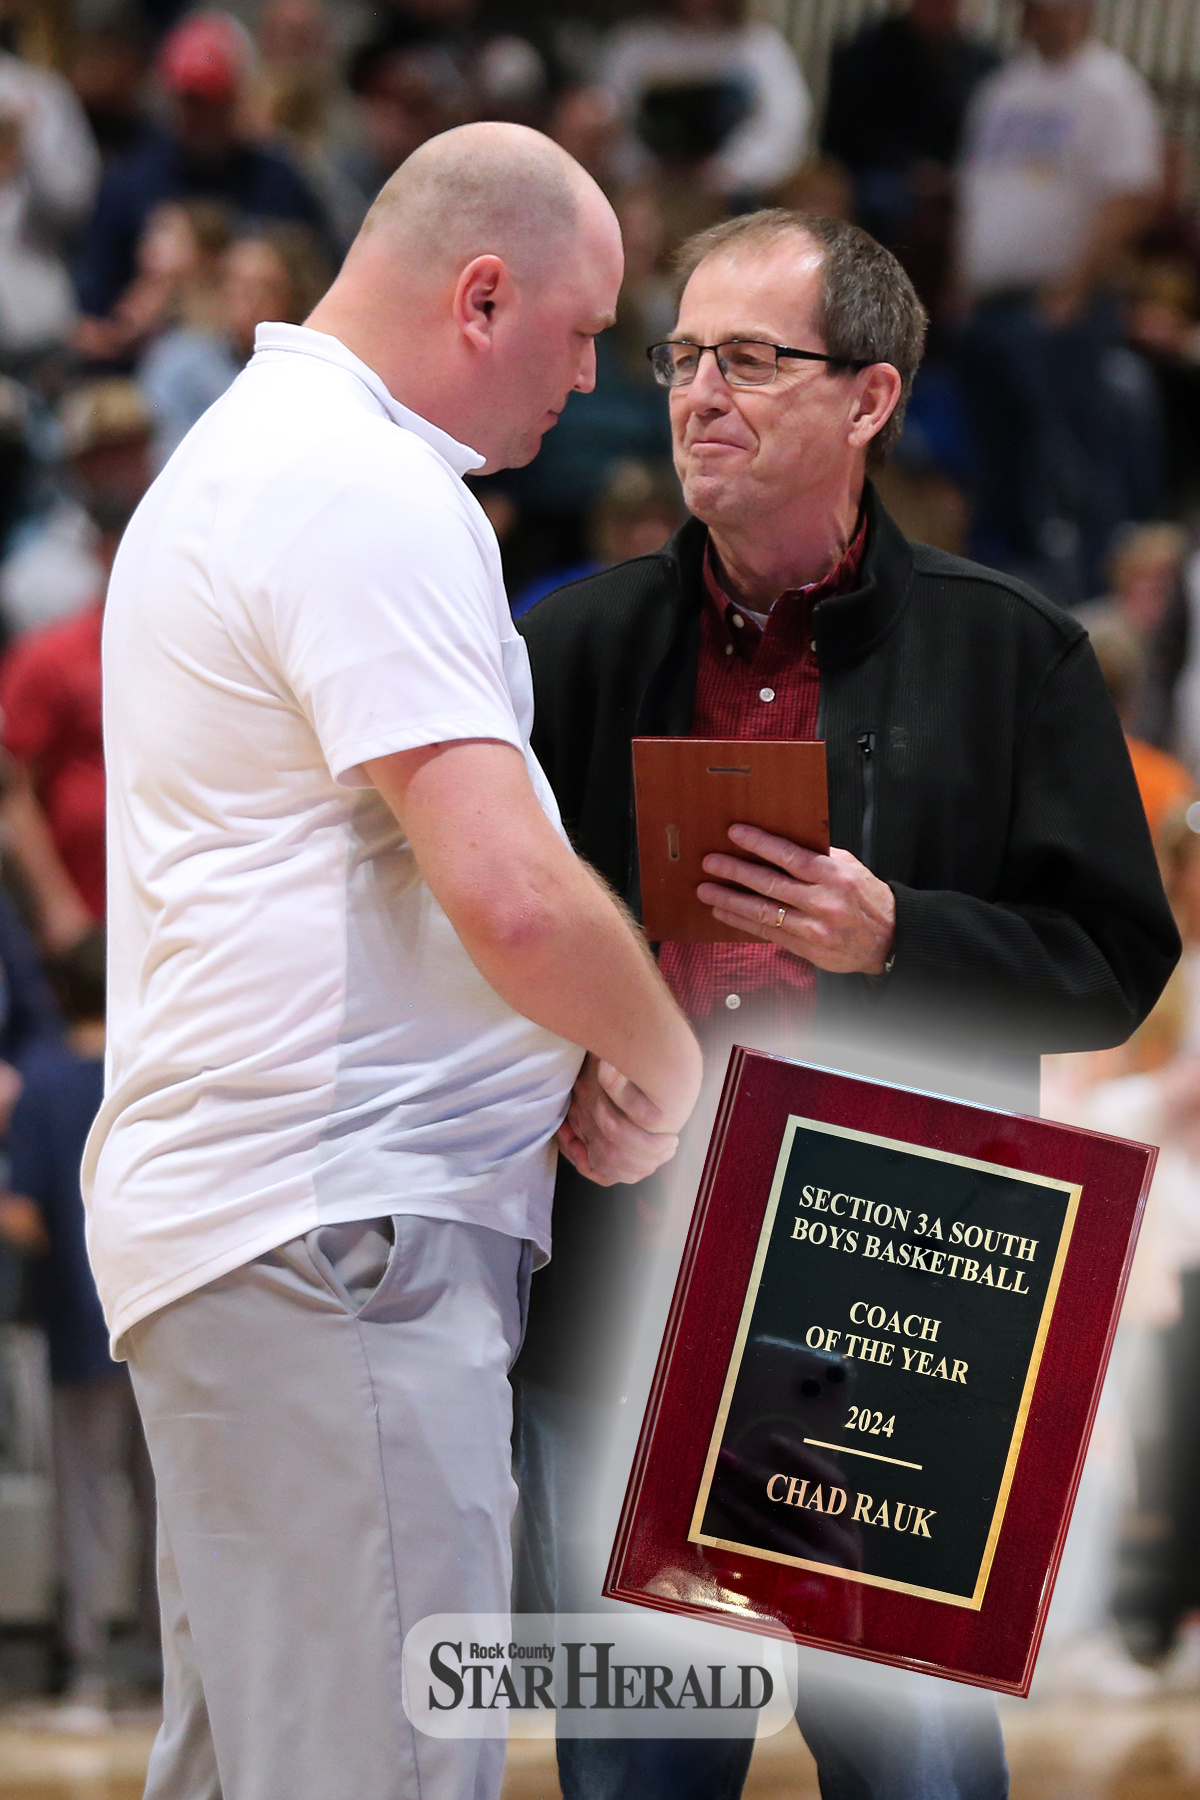 Loren Carlson from the Sub Region 10 Coaches Association, right, presents H-BC boys’ basketball head coach Chad Rauk with the 2024 Section 3A South Coach of the Year plaque after the Section 3 - South Subsection Championship game against Russell-Tyler-Ruthton on March 9 in Marshall.